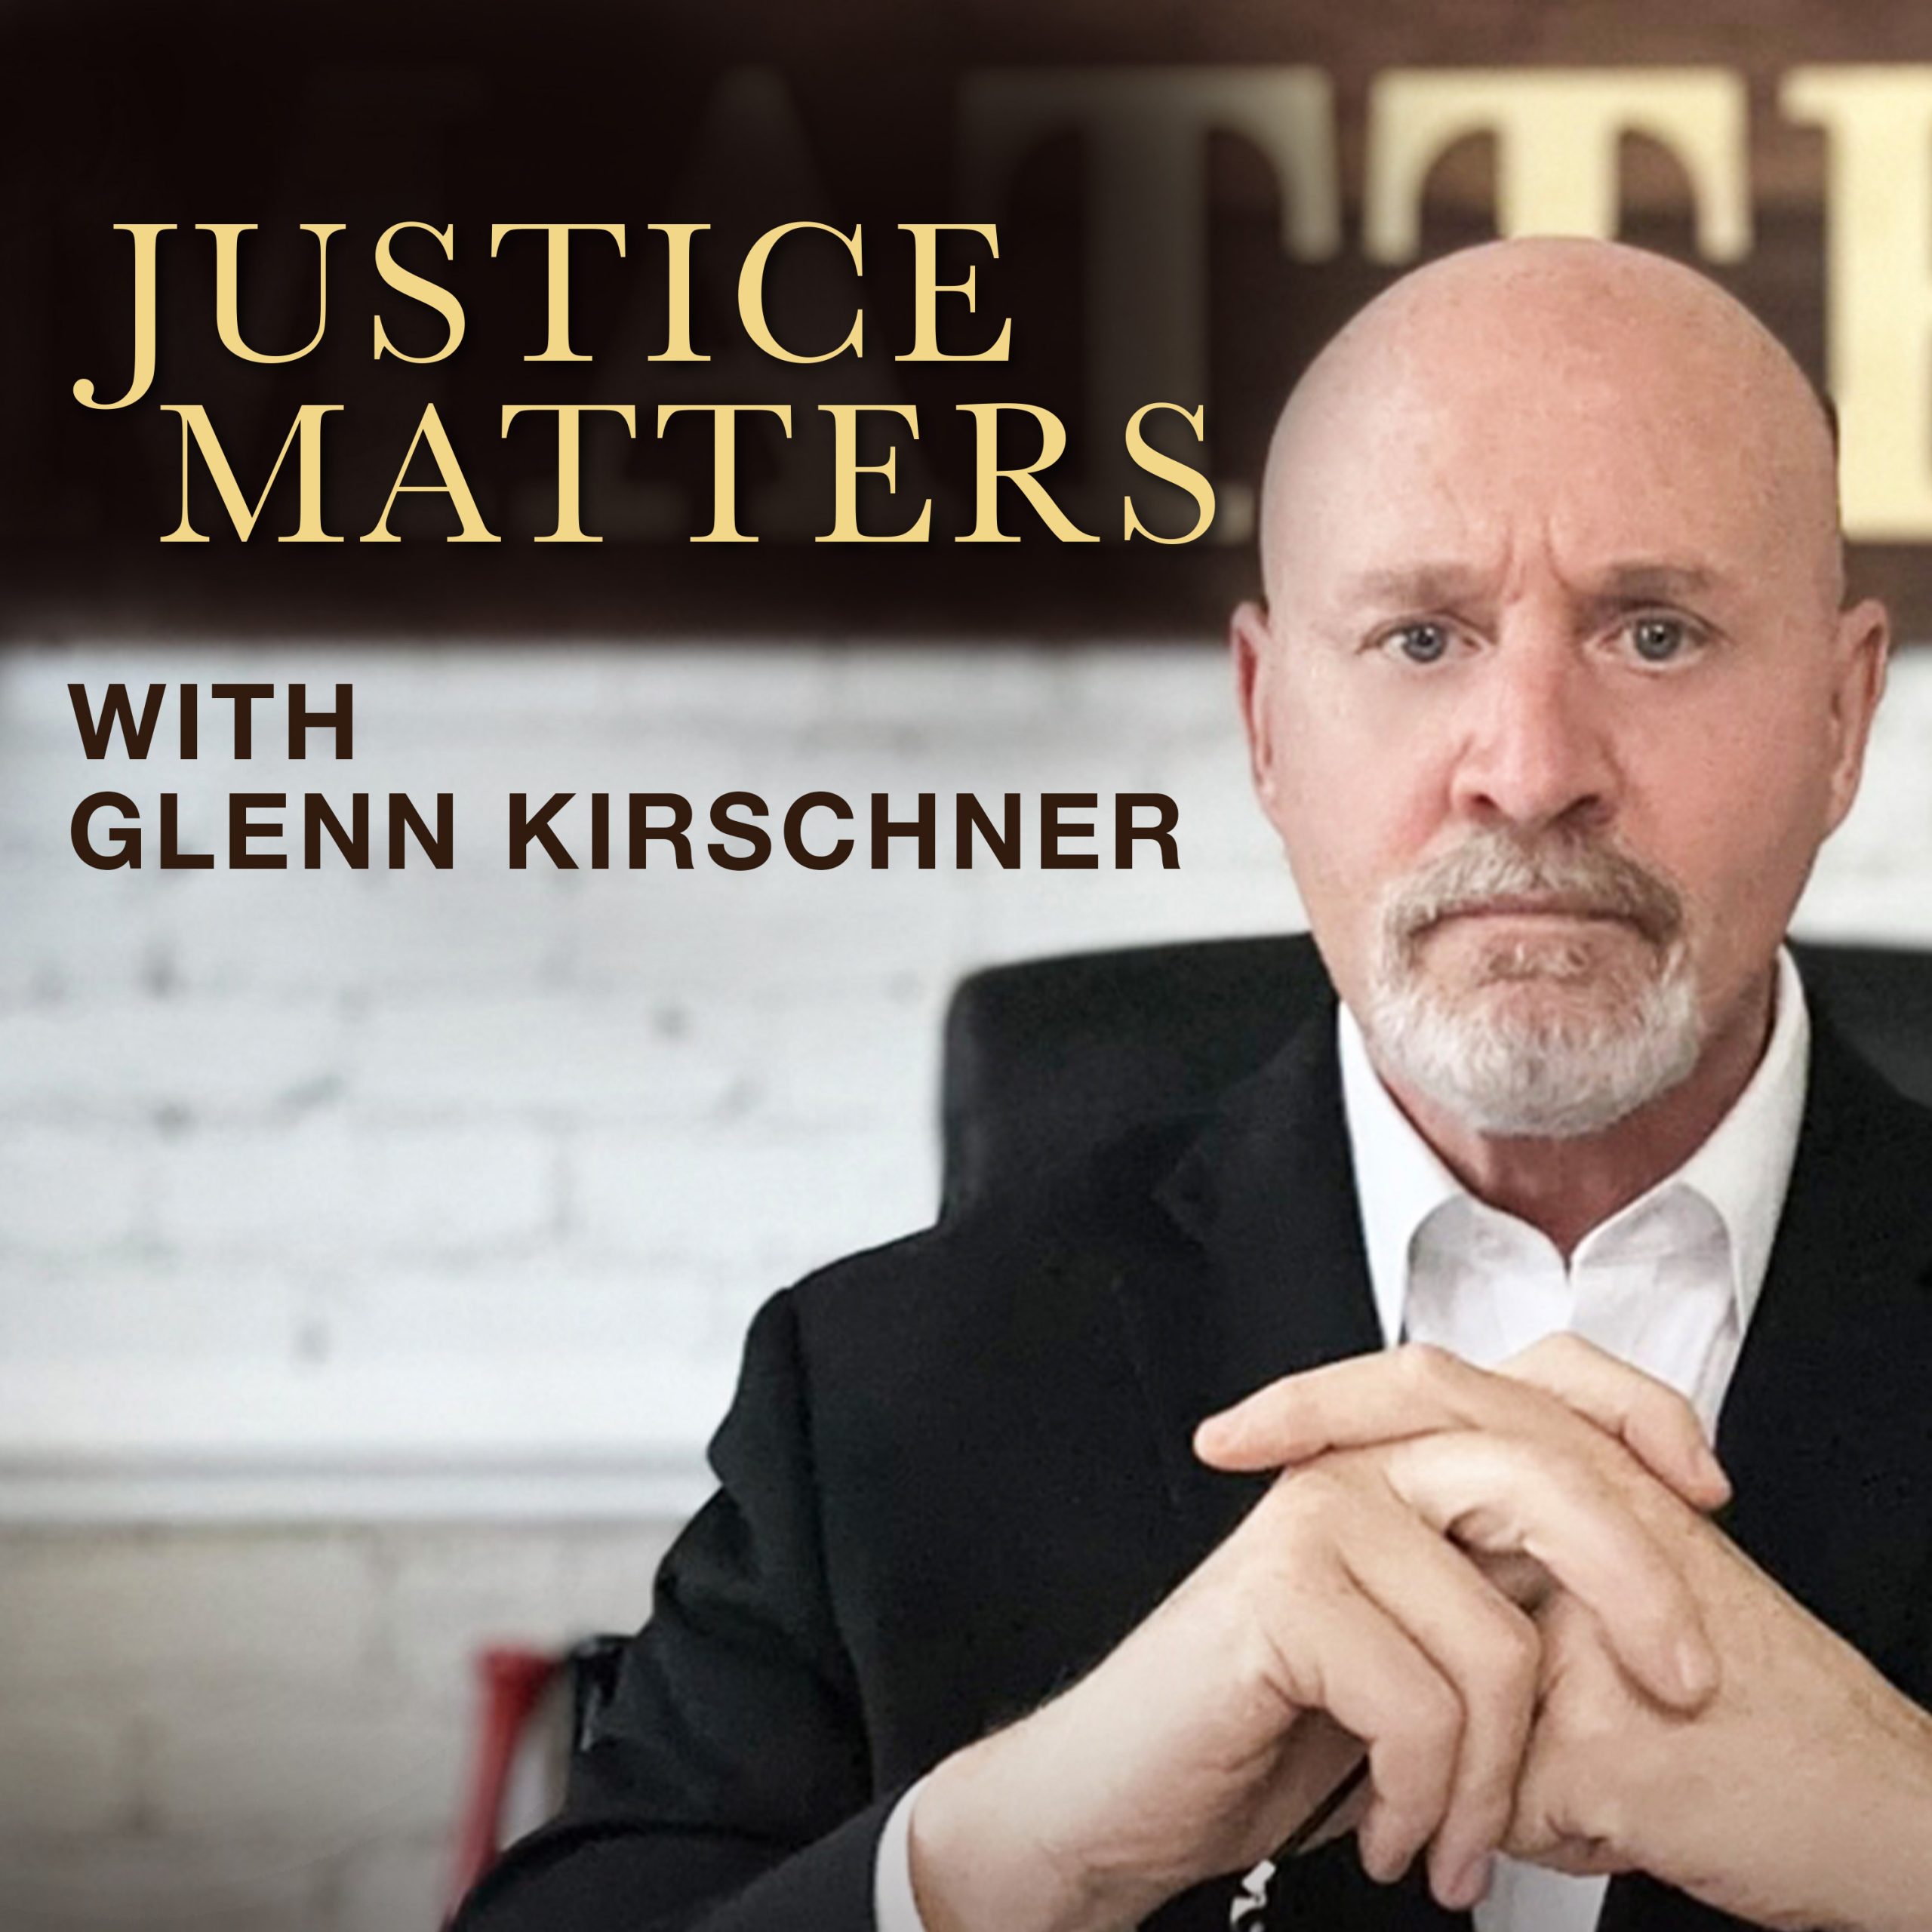 CROSSOVER MEDIA GROUP ADDS “JUSTICE MATTERS WITH GLENN KIRSCHNER” TO EXPANDING PODCAST ROSTER